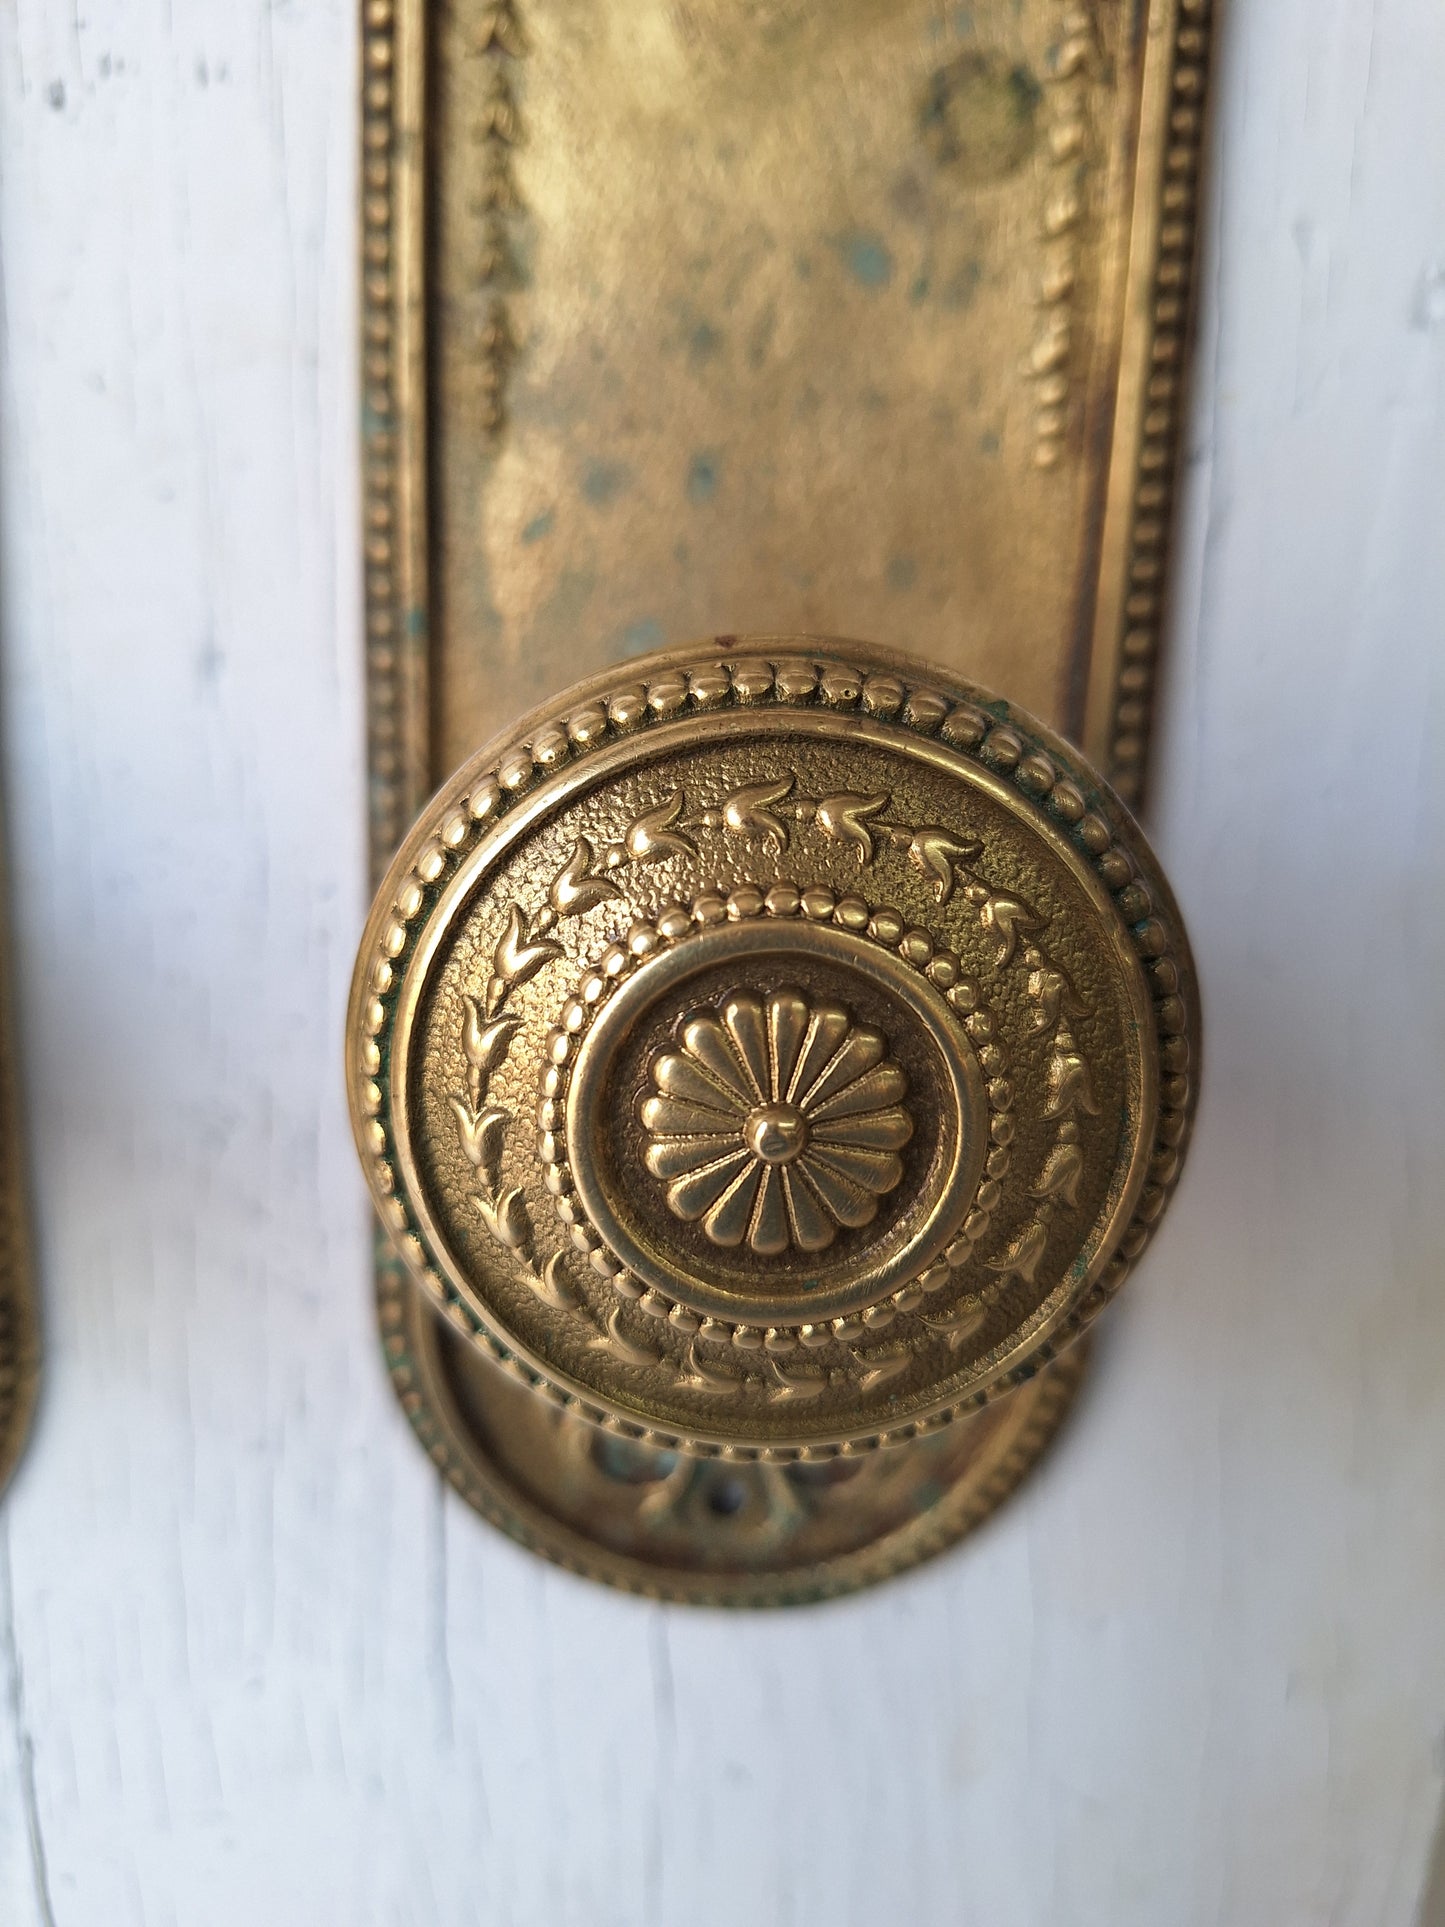 Entry Set of Ornate Solid Bronze Antique Backplates and Knobs, Set of Door Hardware 041604